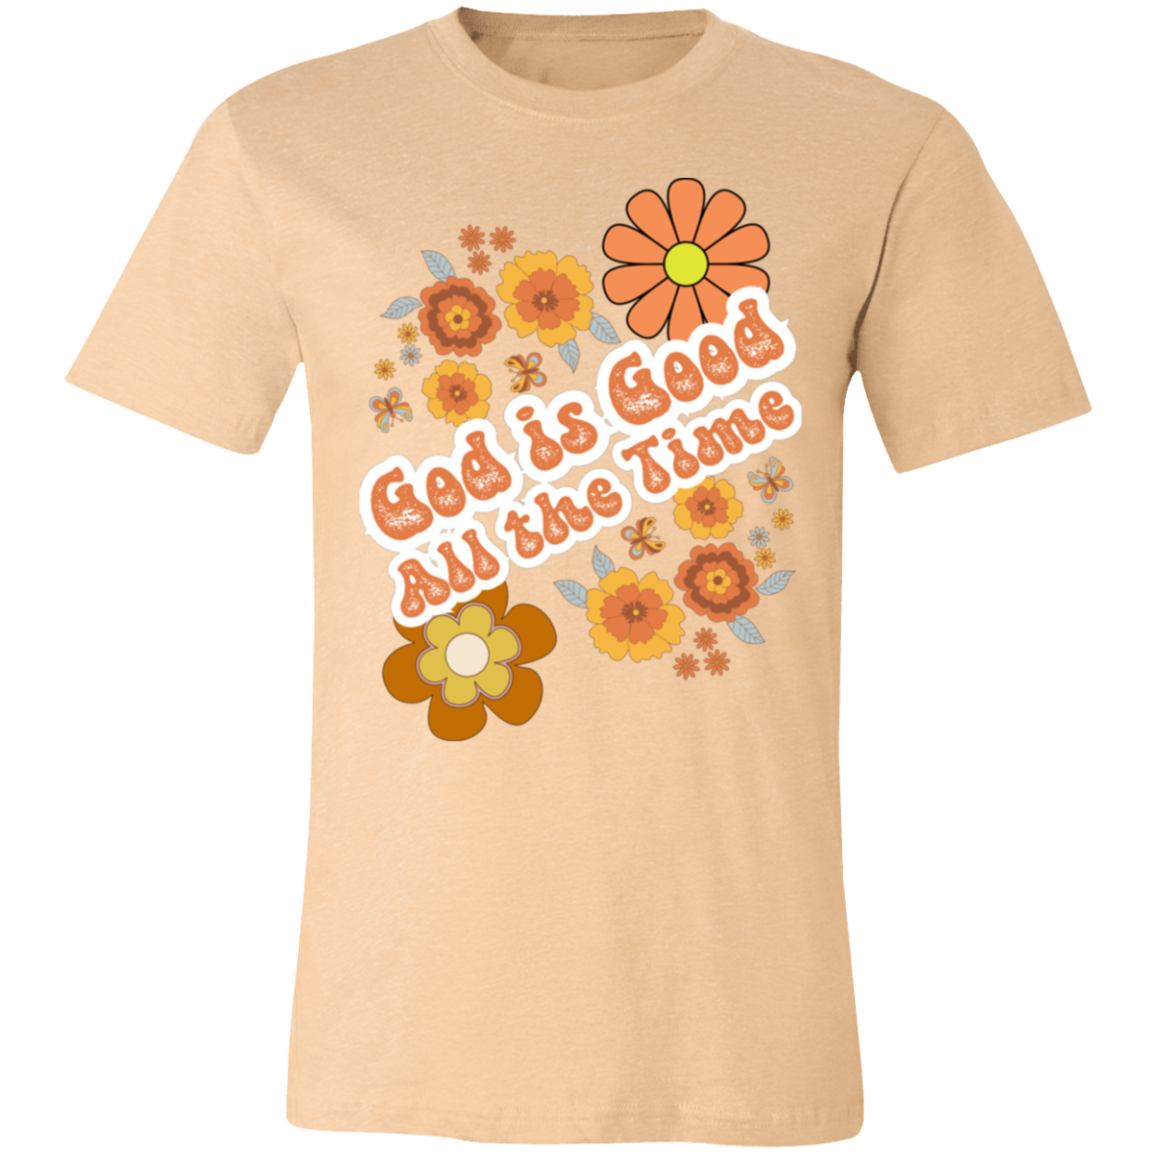 God is Good, All the Time - T-shirt